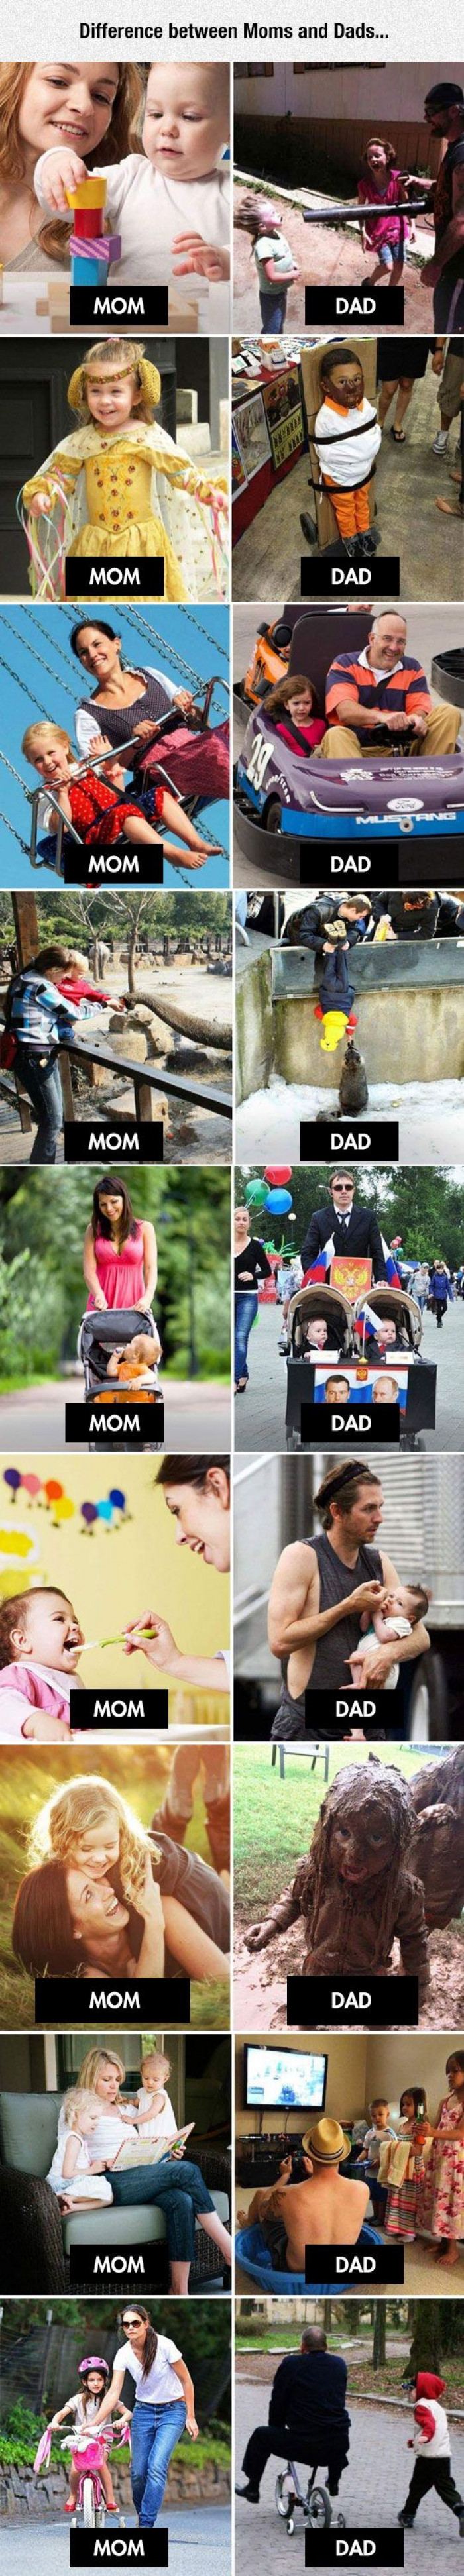 There's A Clear Difference Between Moms And Dads